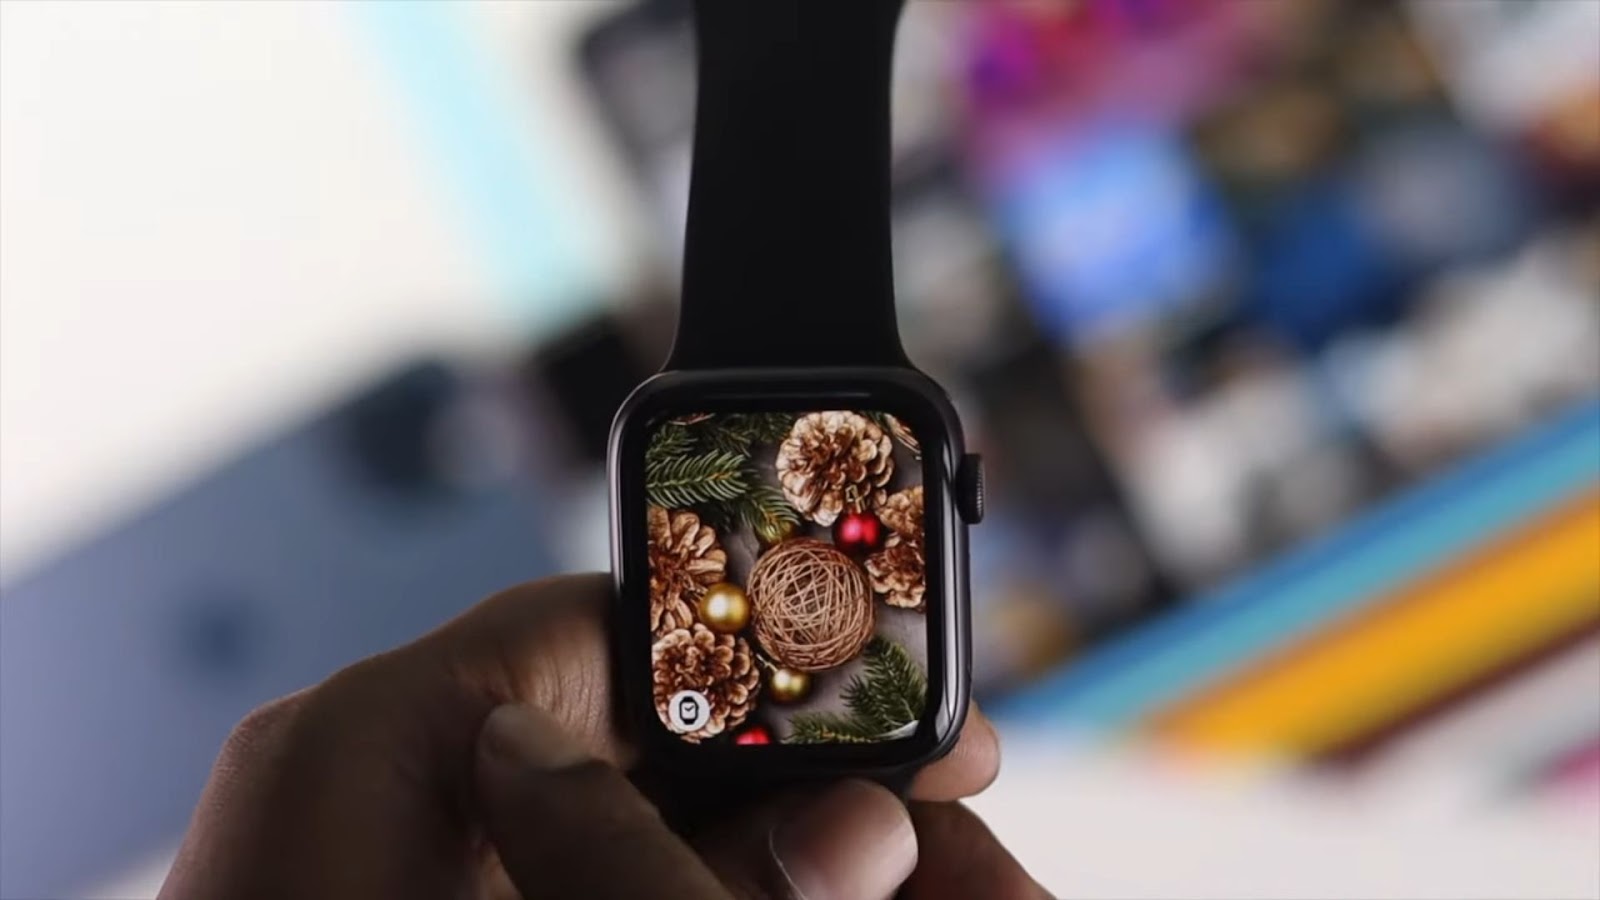 How to View Pictures on Apple Watch